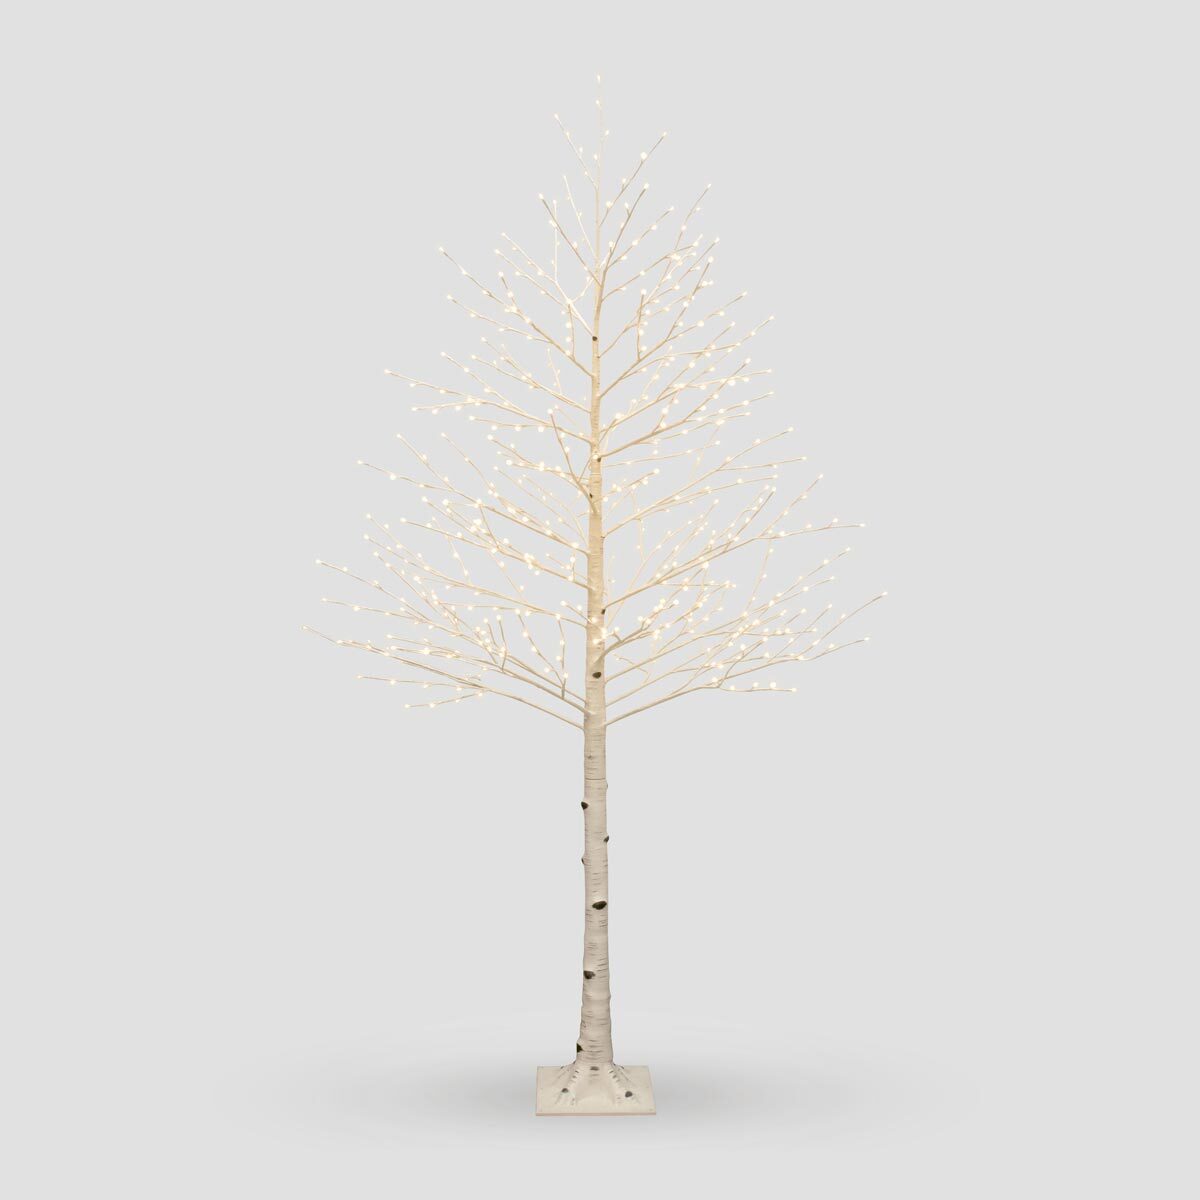 Buy 7.5ft LED Birch Tree Overview Image at Costco.co.uk